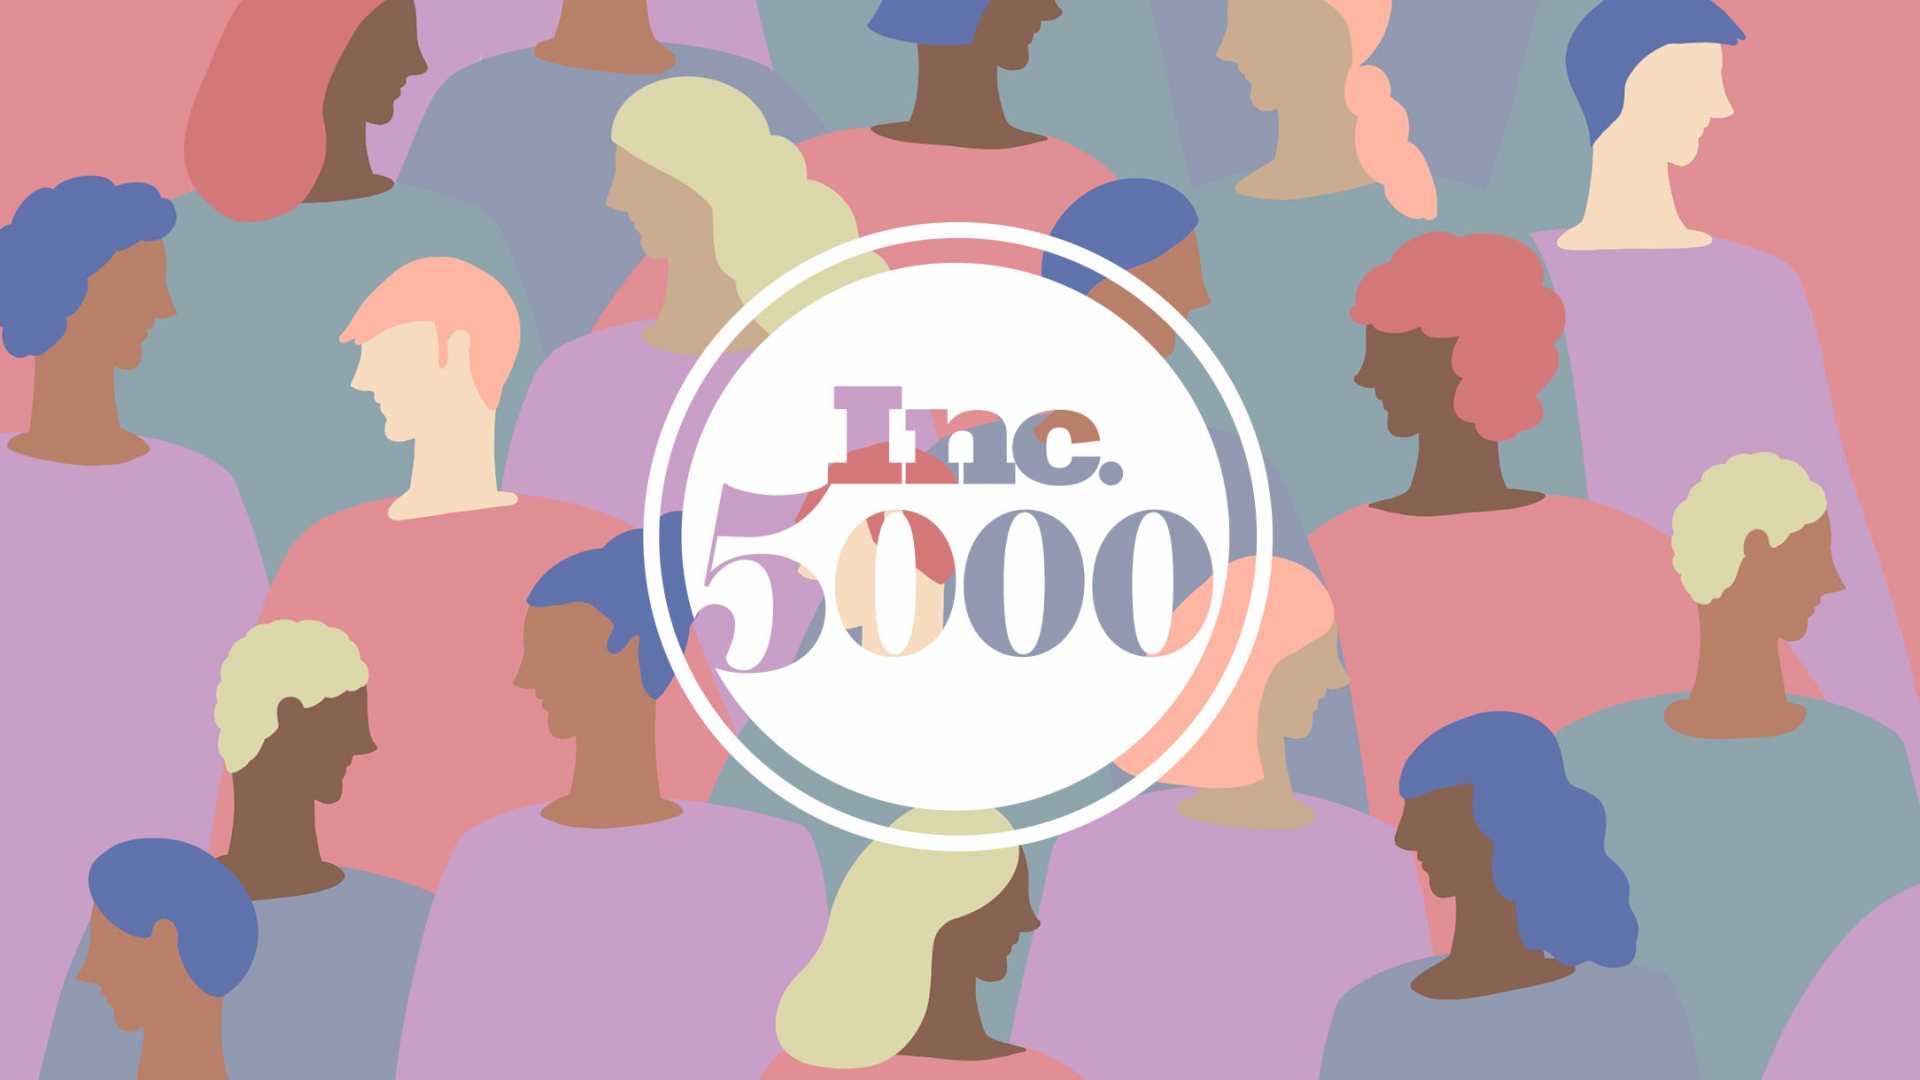 Inc 5000 2020 promo. Pink color scheme, several cartoon people facing each other.